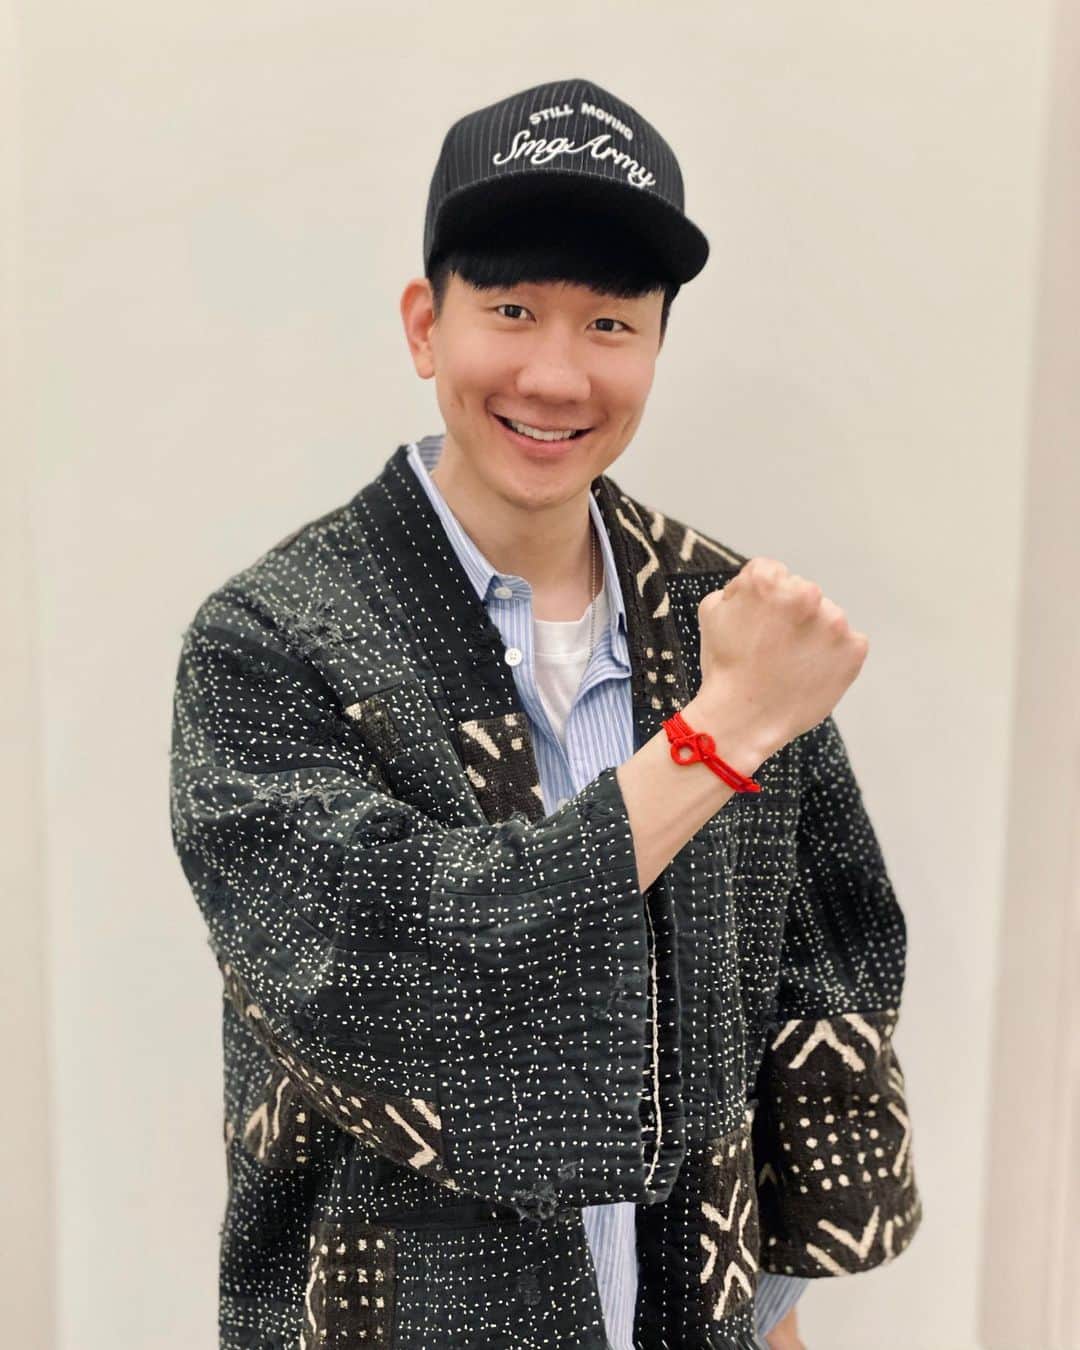 林俊傑さんのインスタグラム写真 - (林俊傑Instagram)「I have made a decision to support the #TOGETHERBAND movement, I believe with our collective efforts to act upon and share, we can help make the world a better place, to END POVERTY.  Today, nearly half of the world's population lives in poverty, and lack of food and clean water continues to kill thousands of people every single day. Together we can work towards reducing poverty and give everyone a chance to live a better life.. Come join me in the movement, head to https://togetherband.org/ website and choose a #TOGETHERBAND goal to support.  Each pack contains two #TOGETHERBANDs so whether you buy a Classic or a Mini, you can share your goal with someone important to you. When you buy your #TOGETHERBAND 100% of the proceeds from each sale are used to spread the word about the Global Goals and fund life-changing projects to build a better future for us all. #TOGETHERBANDS are crafted using innovative and sustainable materials. Handmade in Nepal from upcycled ocean plastic, 1 Kg of plastic is removed from marine environments whenever you buy a band. All of our bands generate sustainable employment. The clasp is made from decommissioned illegal firearms in the silhouette of an upcycled ring pull, in reference to the BOTTLETOP signature material.  我決定支持 #TOGETHERBAND 的公益行動，而我相信只要大家共同一起行動、分享，我們可以讓這個世界更美好！  身處現代發展繁榮的世界一隅，失衡的世界另一端佔世界人口：7億人，仍然生活在極端貧困中，正在努力滿足最基本的生活需求：健康，教育，獲得水和衛生設施等。他們因著無法抵抗天災的居住環境和受污染的土地，面臨著貧窮、飢餓甚至是疾病的威脅。全世界有五分之一的兒童生活在極端貧困中，而確保所有兒童和其他弱勢群體的社會保護對減少貧困成為至關重要的因素。 讓我們攜手共同為世界盡一點心力，關心需要幫助的人們，為所愛的世界一起努力。  你也可以上網透過 https://togetherband.org/ 網站，選擇你所關心的議題，和我一起實現這些目標。 每個盒子中都包含兩個#TOGETHERBAND 手環，可以與對自己重要的人一起分享目標。 每一筆手環收益將100％用於宣傳全球目標並資助你所選擇那一個需要被幫助的生命項目，為所有人創造更美好的未來。 每一個手環繩子部分是從海洋環境中取出1000公克可回收利用的海洋塑料手工製成，讓我們也一起創造實際可持續的就業機會。手環扣環則是由已退役的非法槍支回收製成，輪廓形狀象徵著可循環使用的拉環。  #togetherband #togetherbandfam #ubs @ubs @togetherbandofficial」1月22日 20時16分 - jjlin